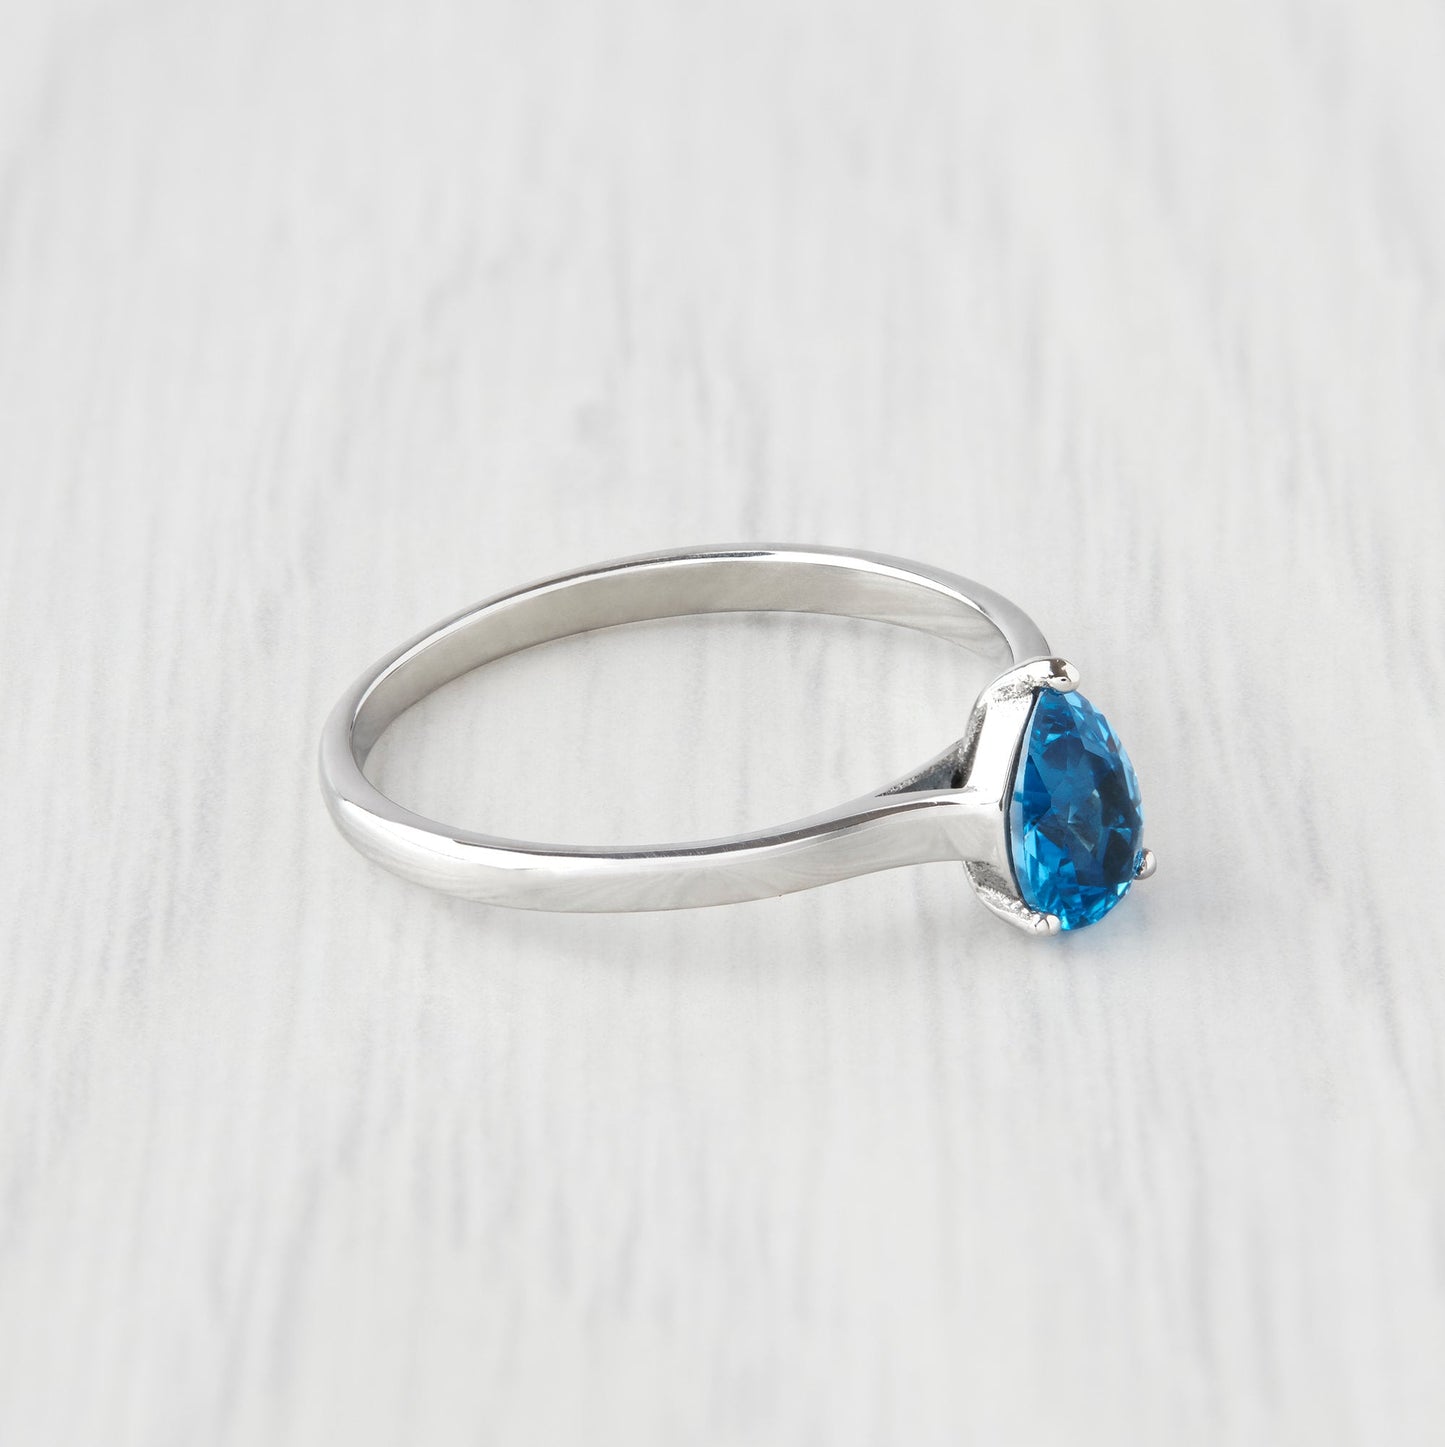 0.7ct Oval Cut natural blue topaz Solitaire cathedral ring in Titanium or White Gold